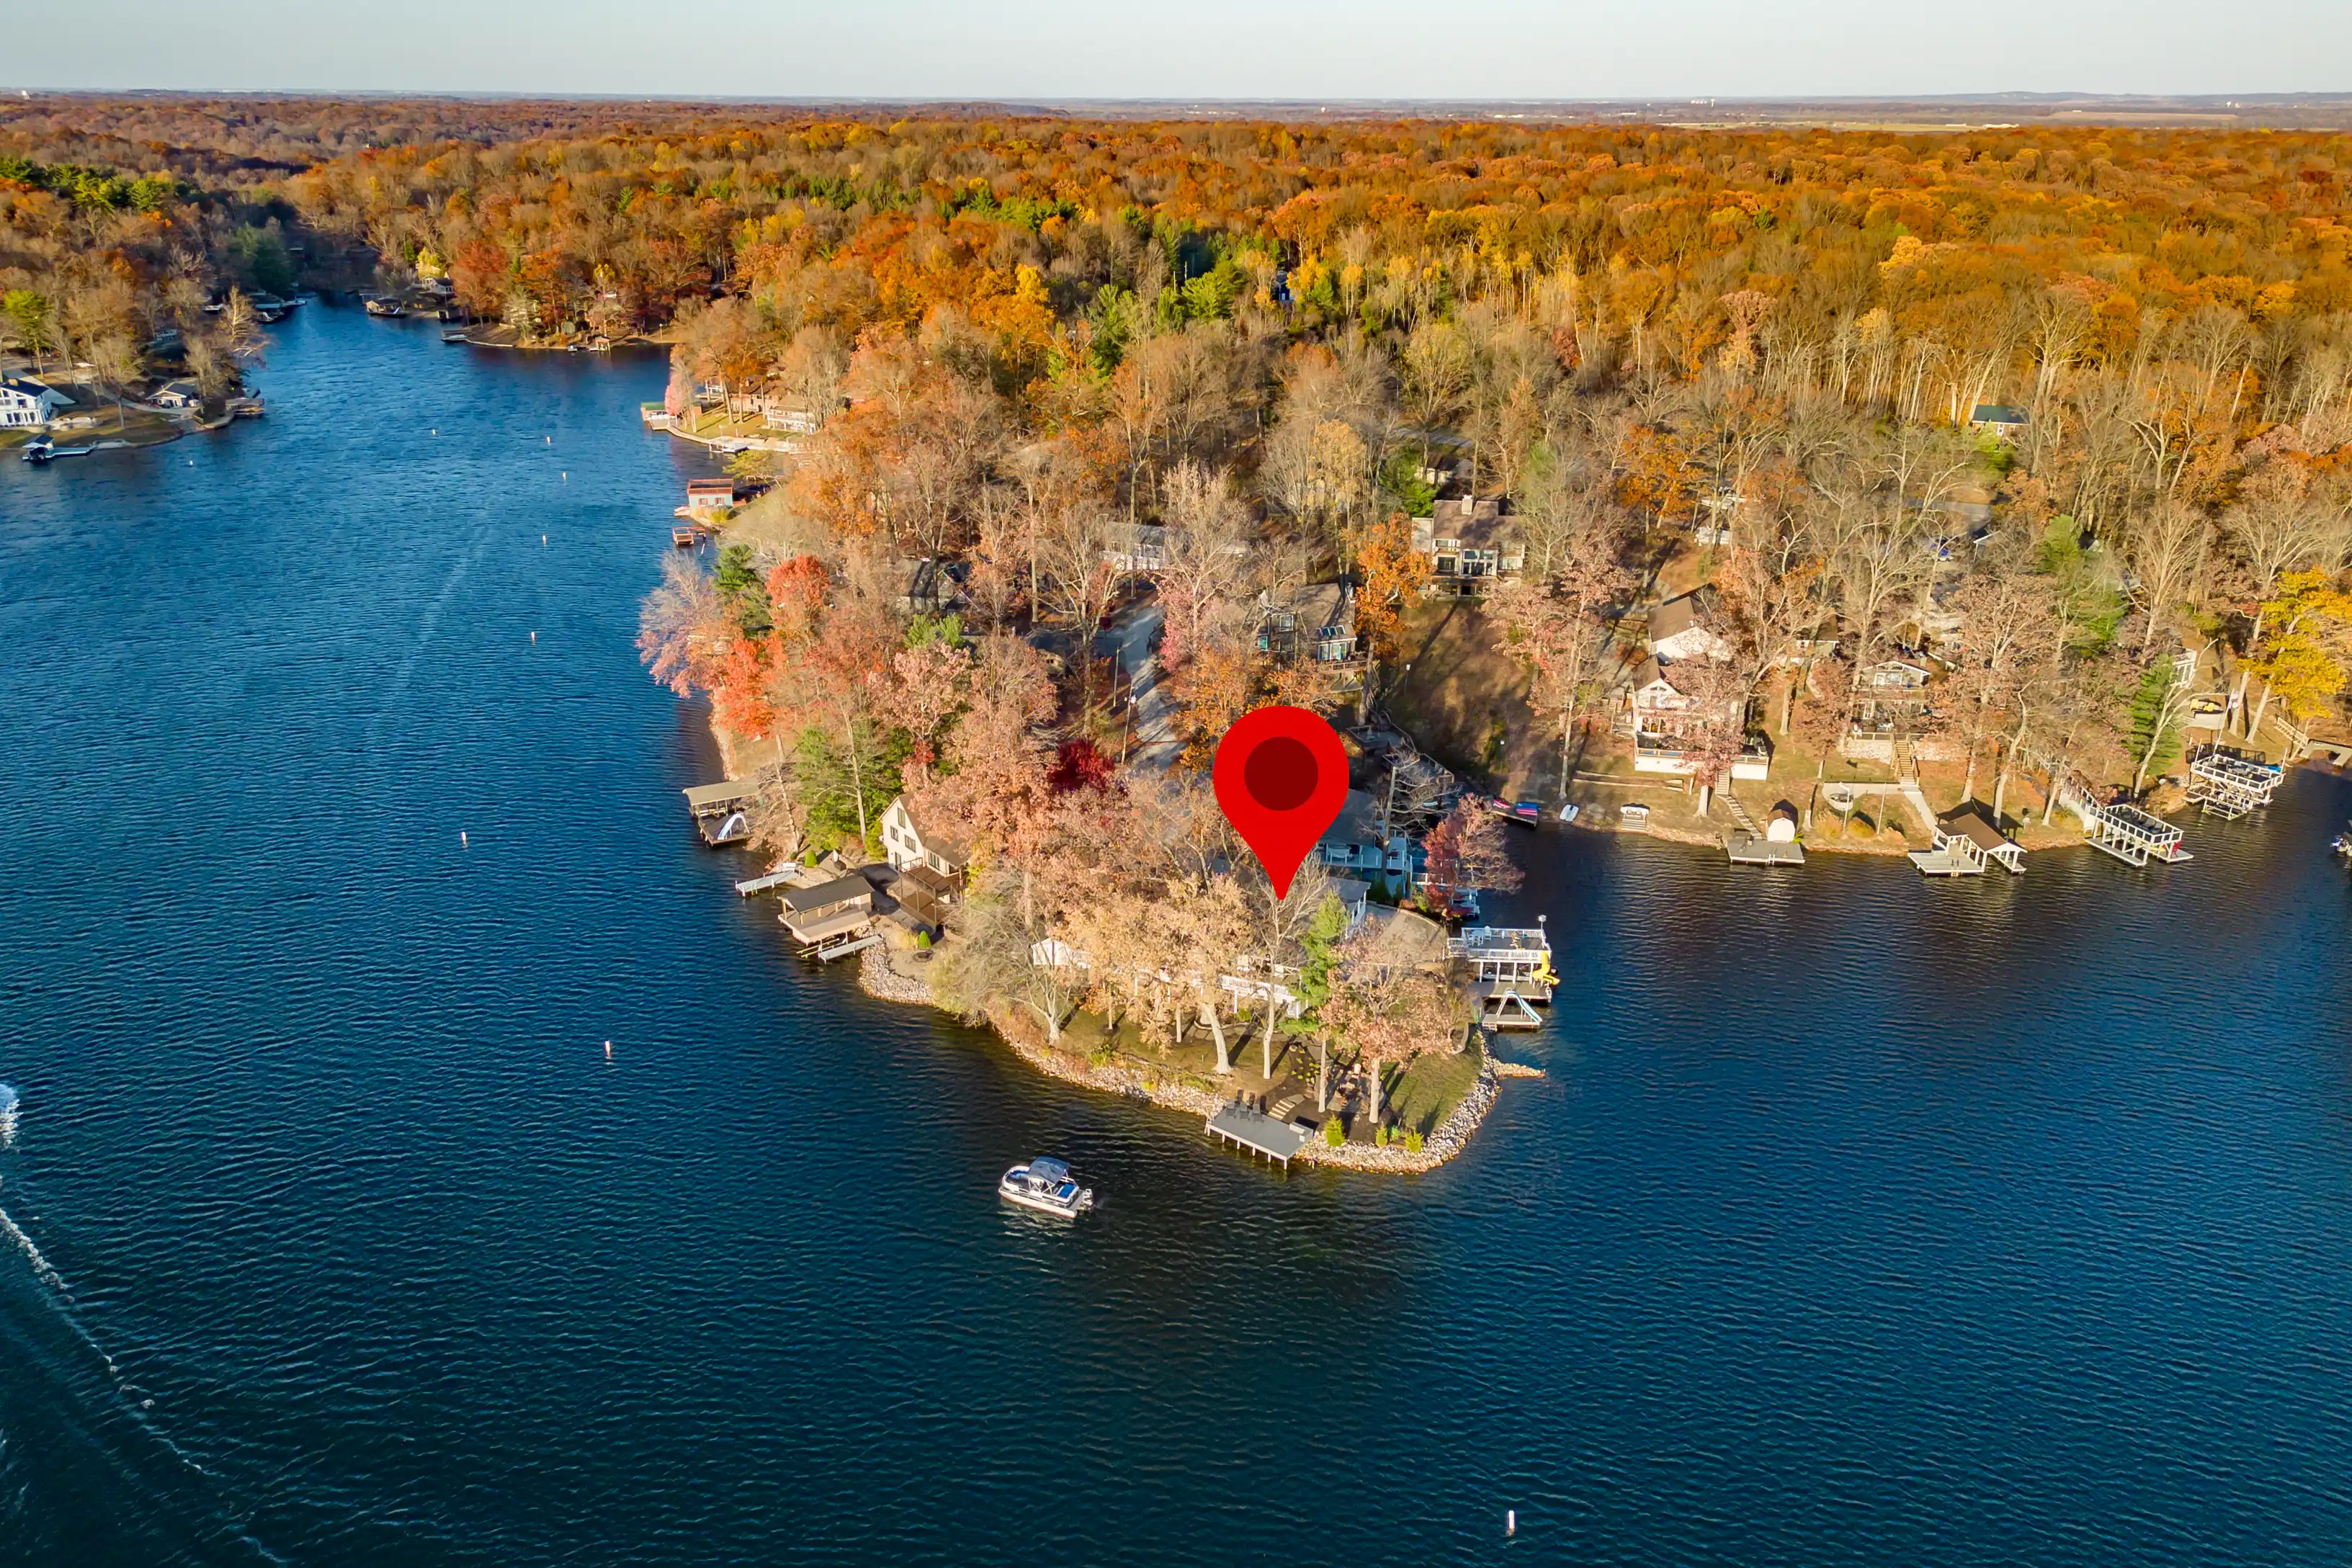 Aerial view of a lake with a peninsula dotted with houses amid colorful autumn trees, marked by a red location pin.